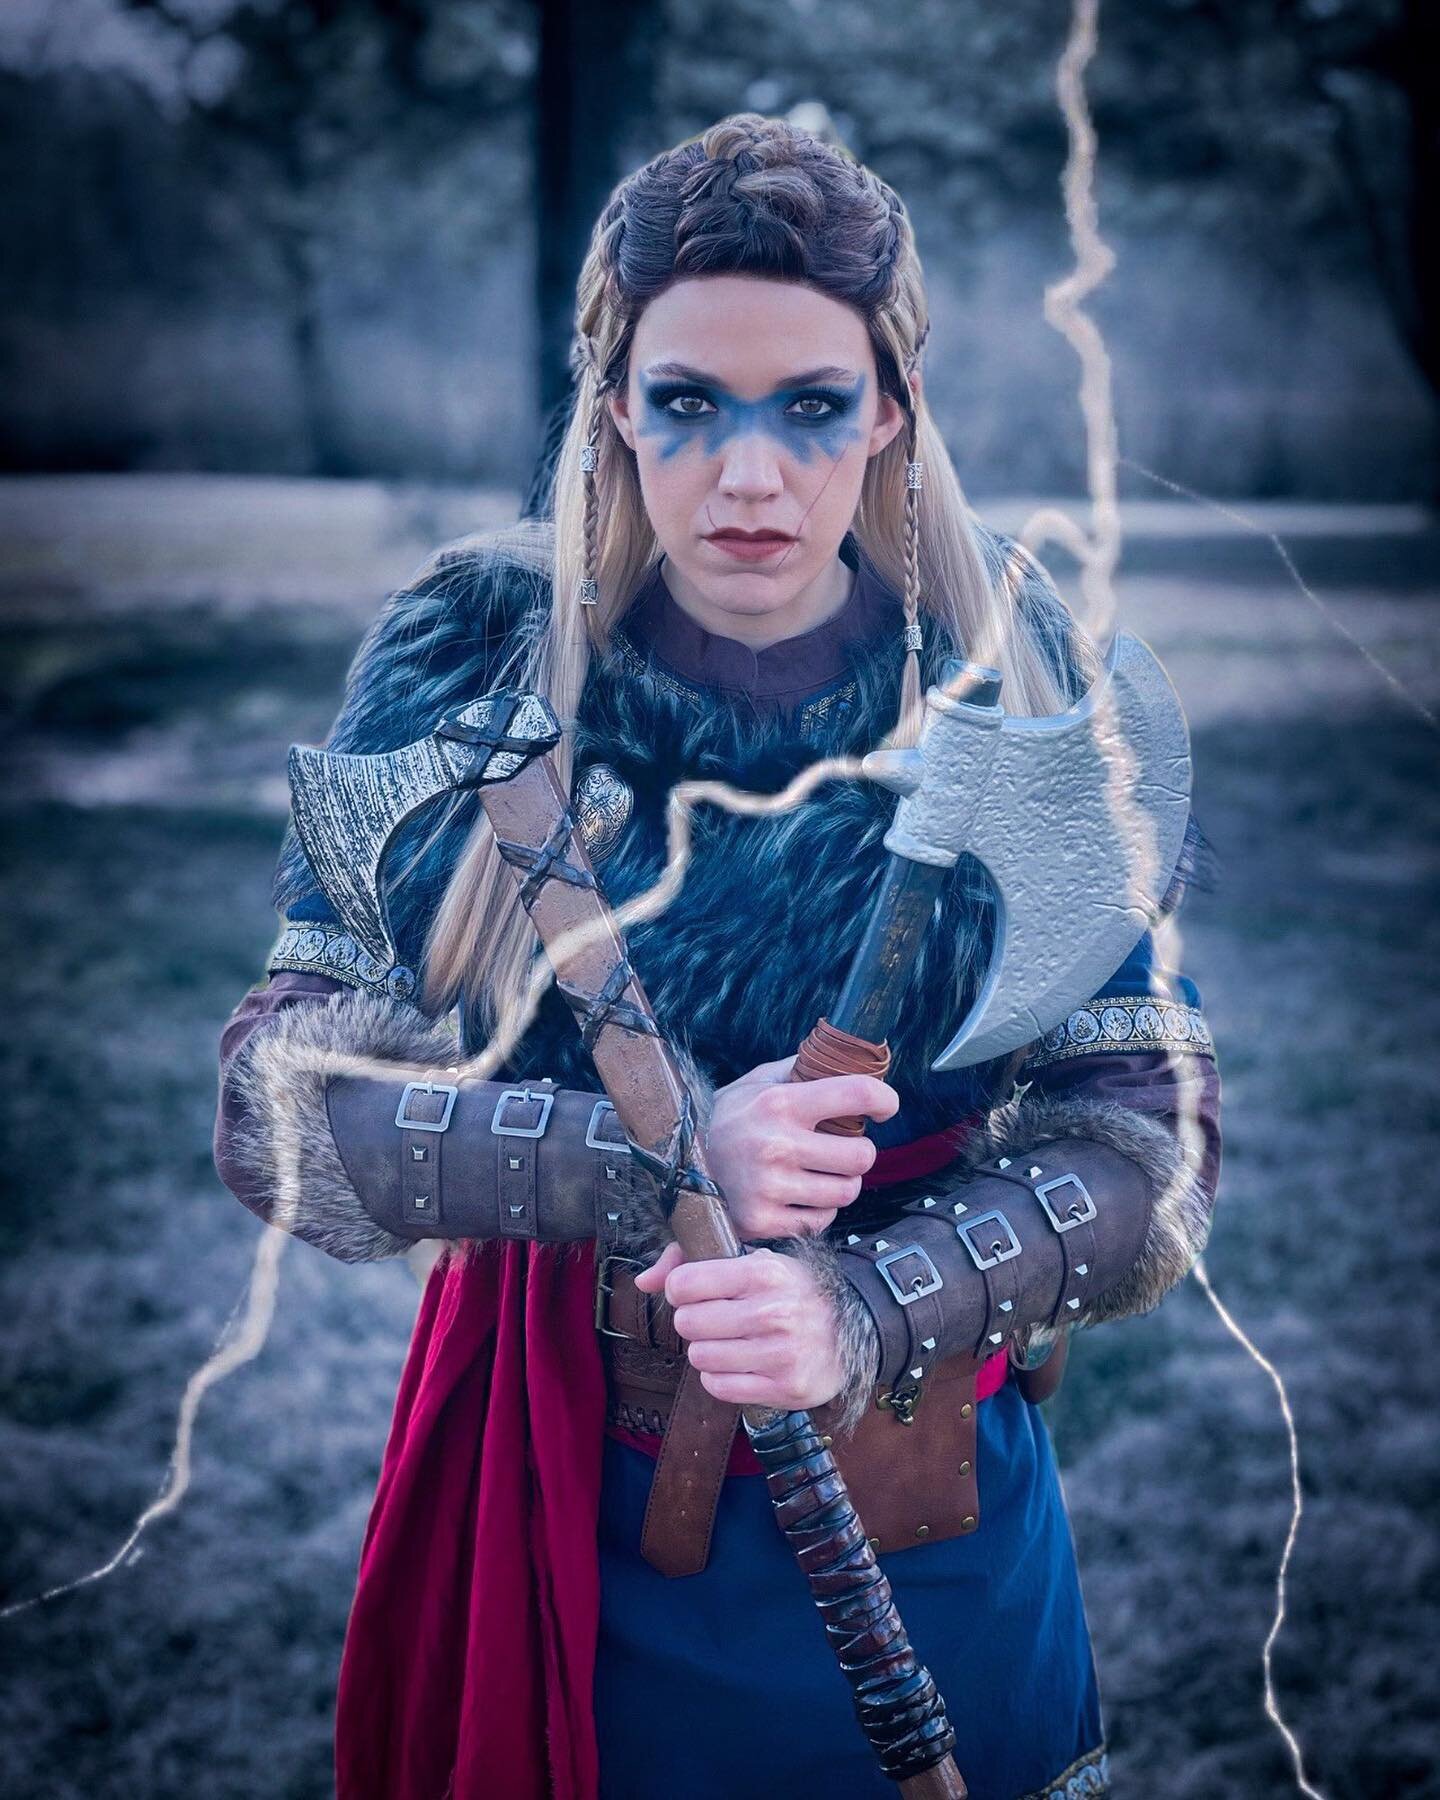 So I know it makes us total nerds, but we have so much fun putting together the little mini-scripts and cosplays for the front of our #DoctoringTheBooks videos &mdash; like this shield maiden from our video on Blunt Force Trauma (modeled after Eivor 